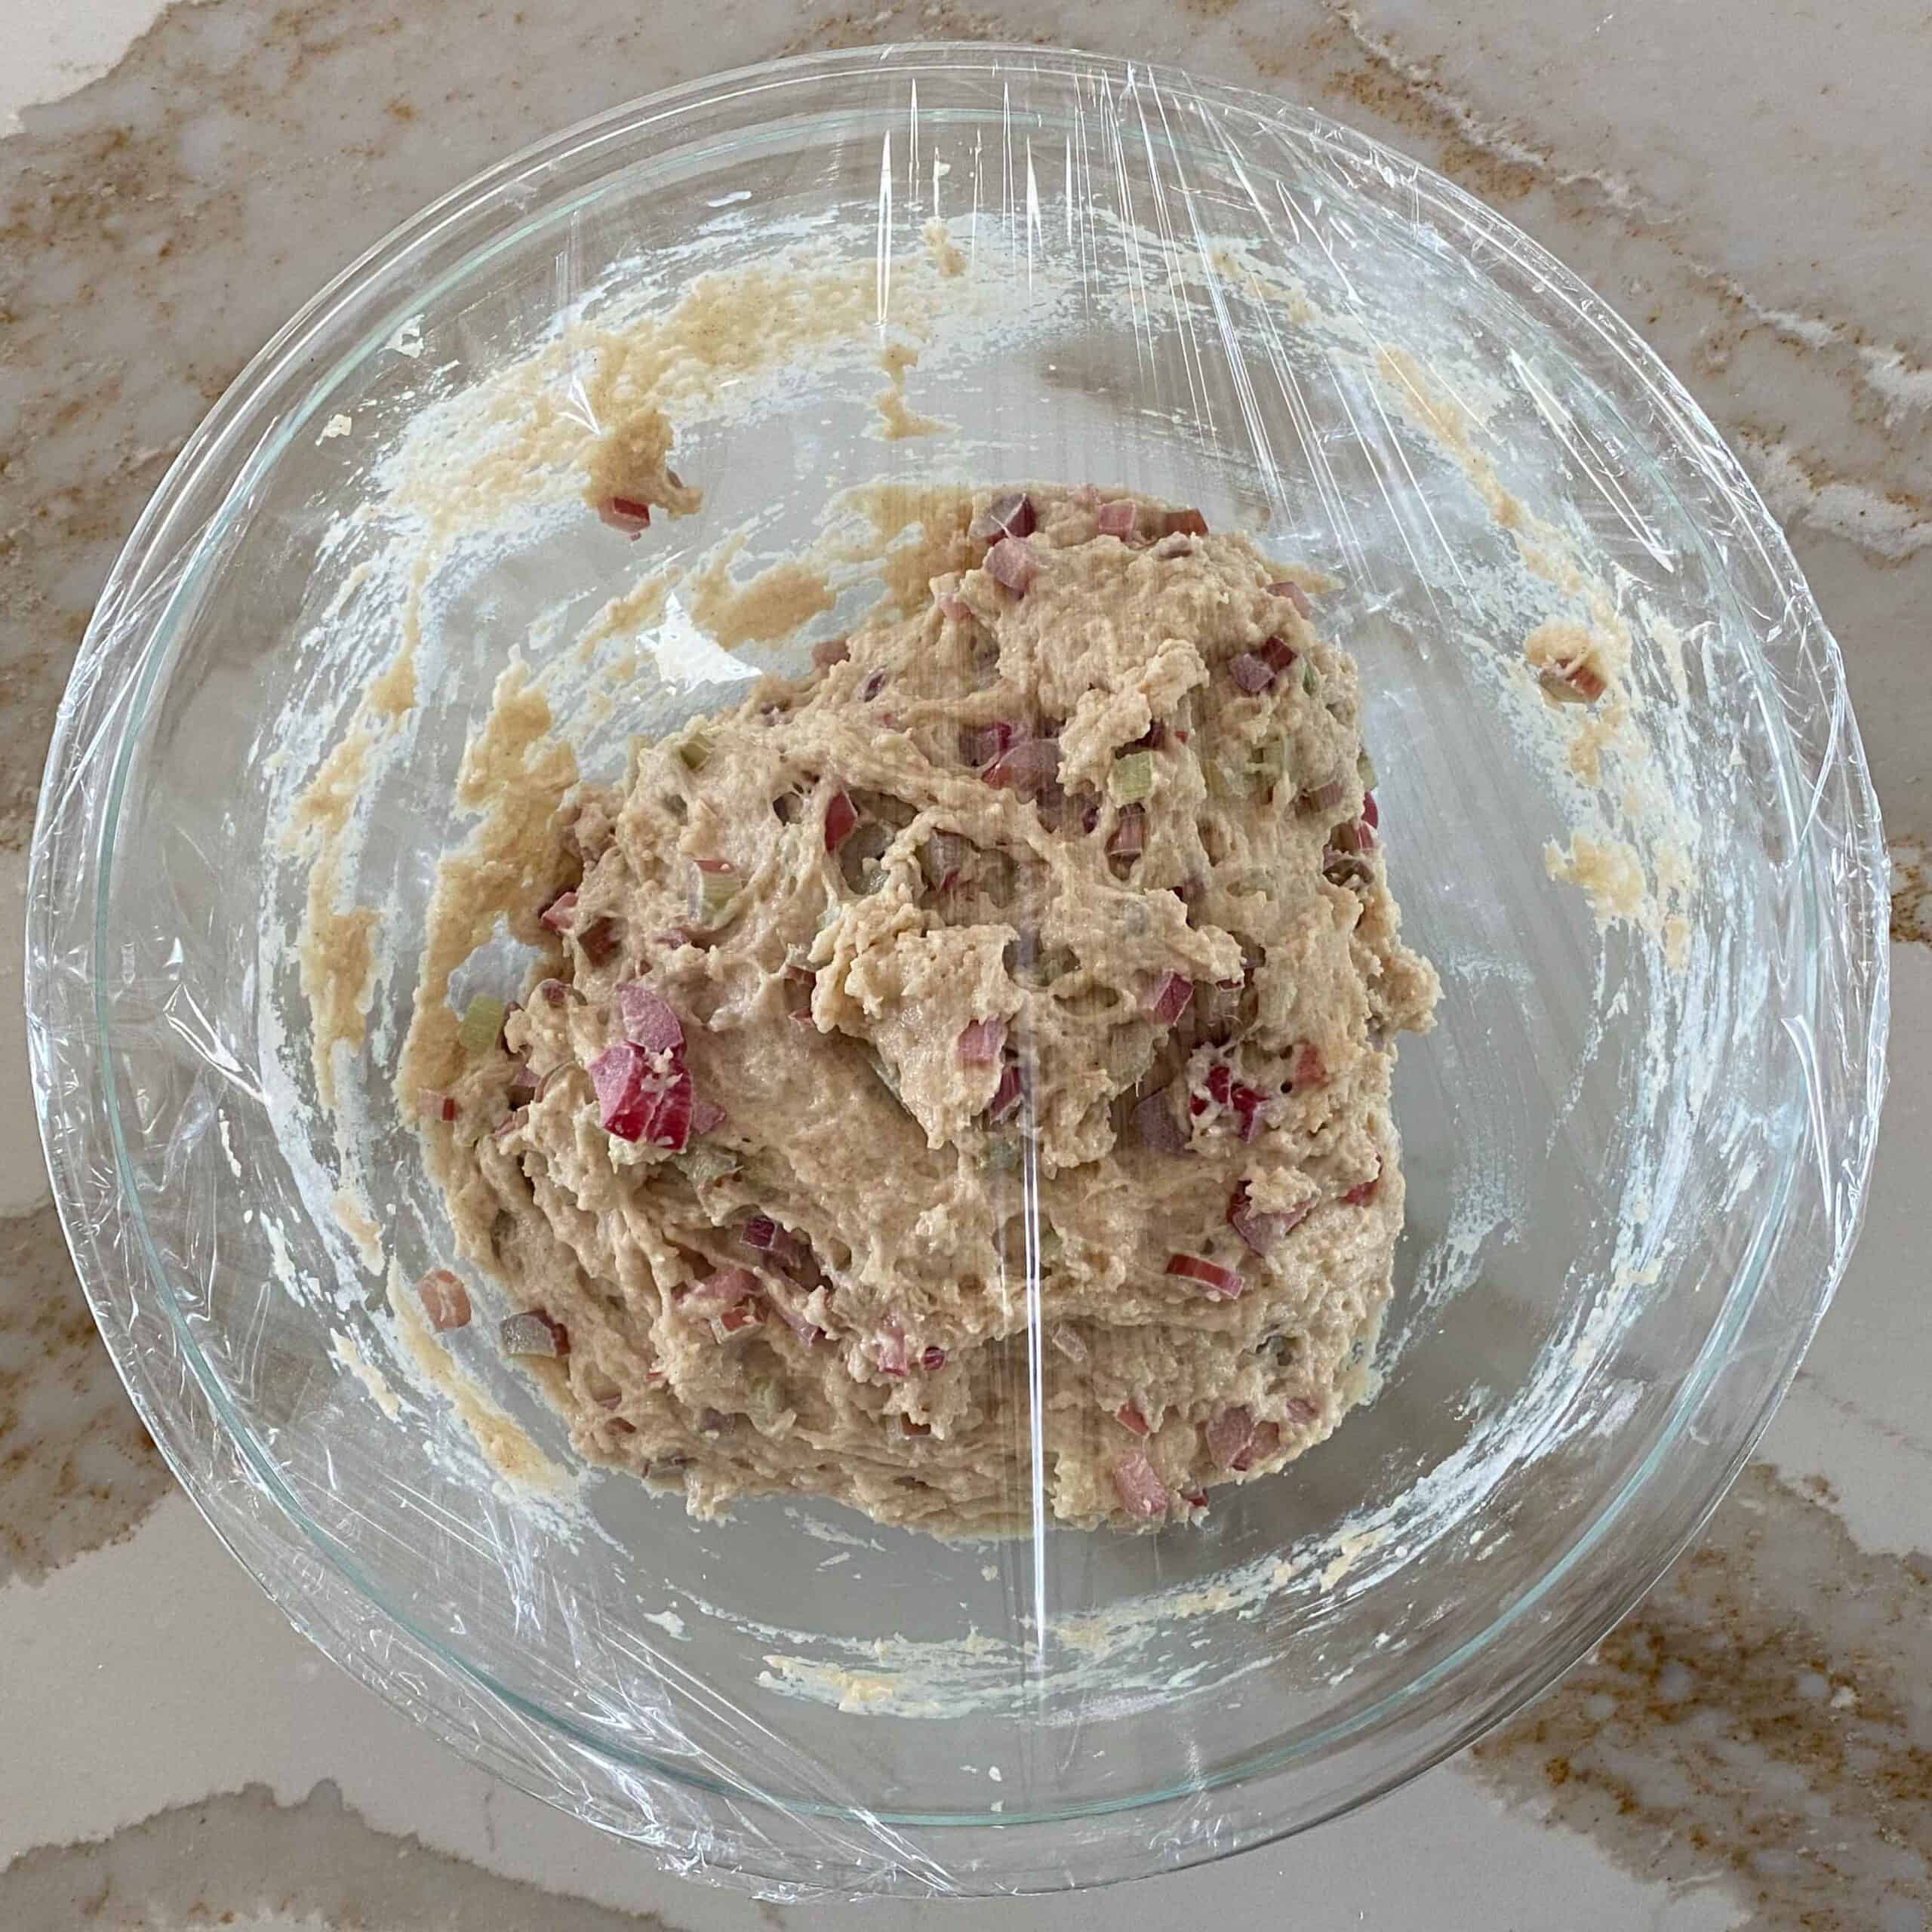 Rhubarb muffin batter in a covered glass bowl, ready to be chilled.